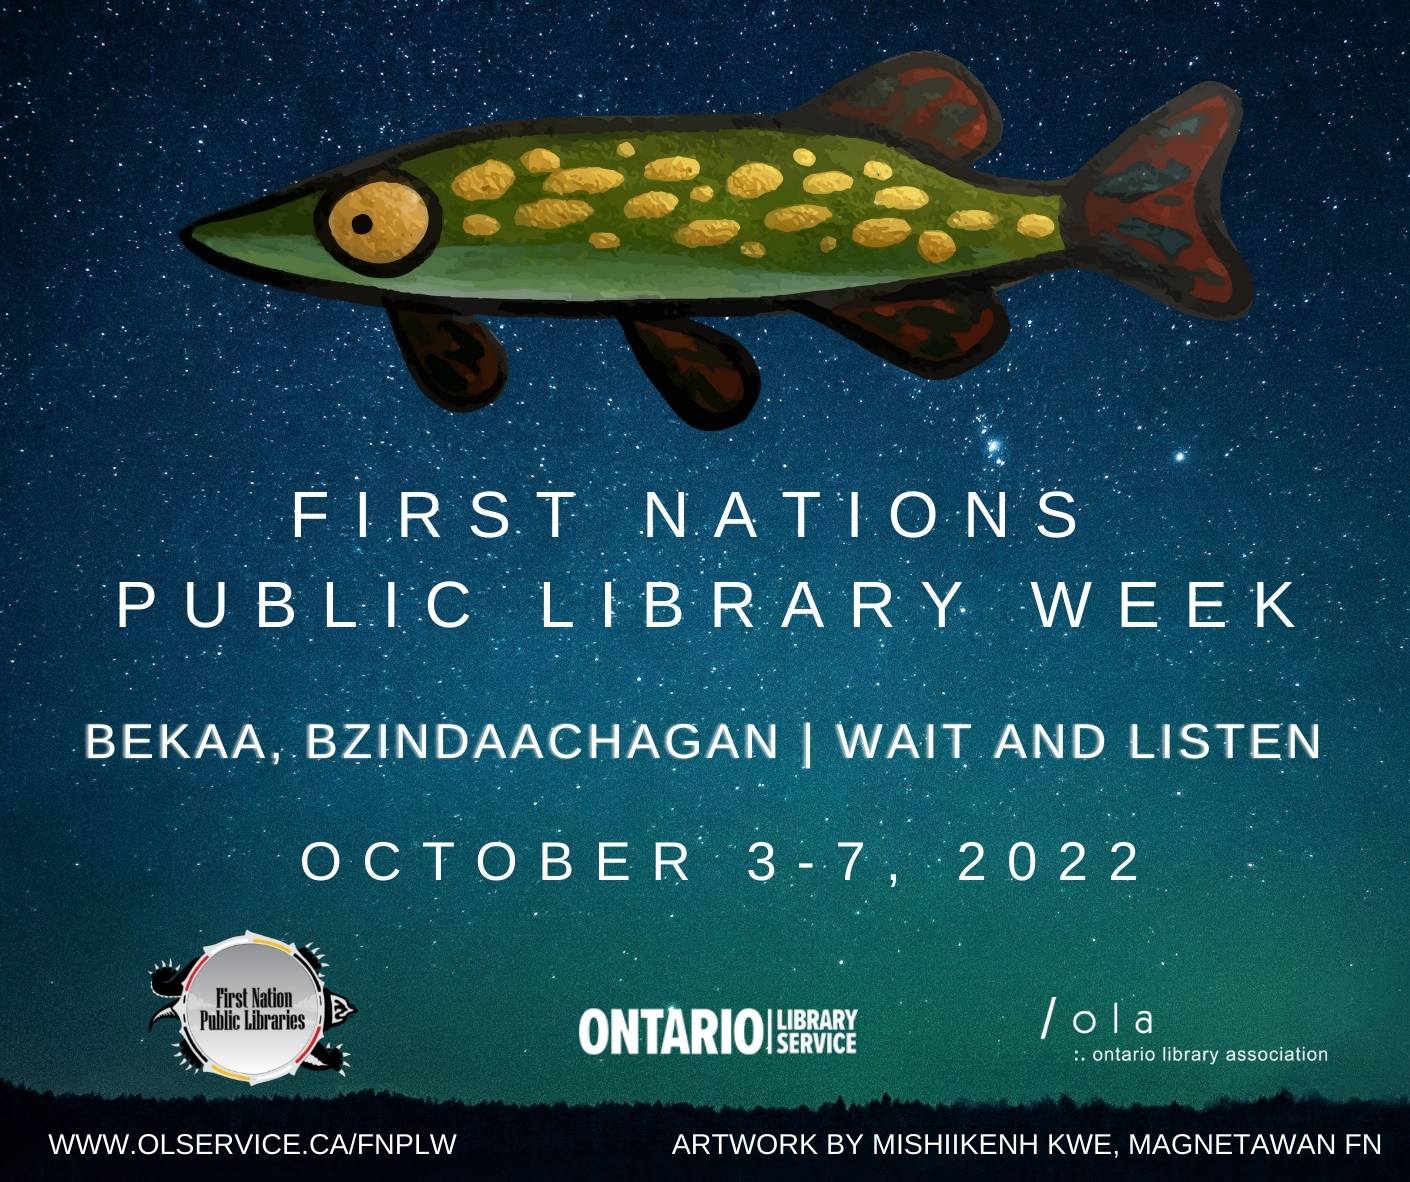 First Nations Public Library Week, October 3 - 7